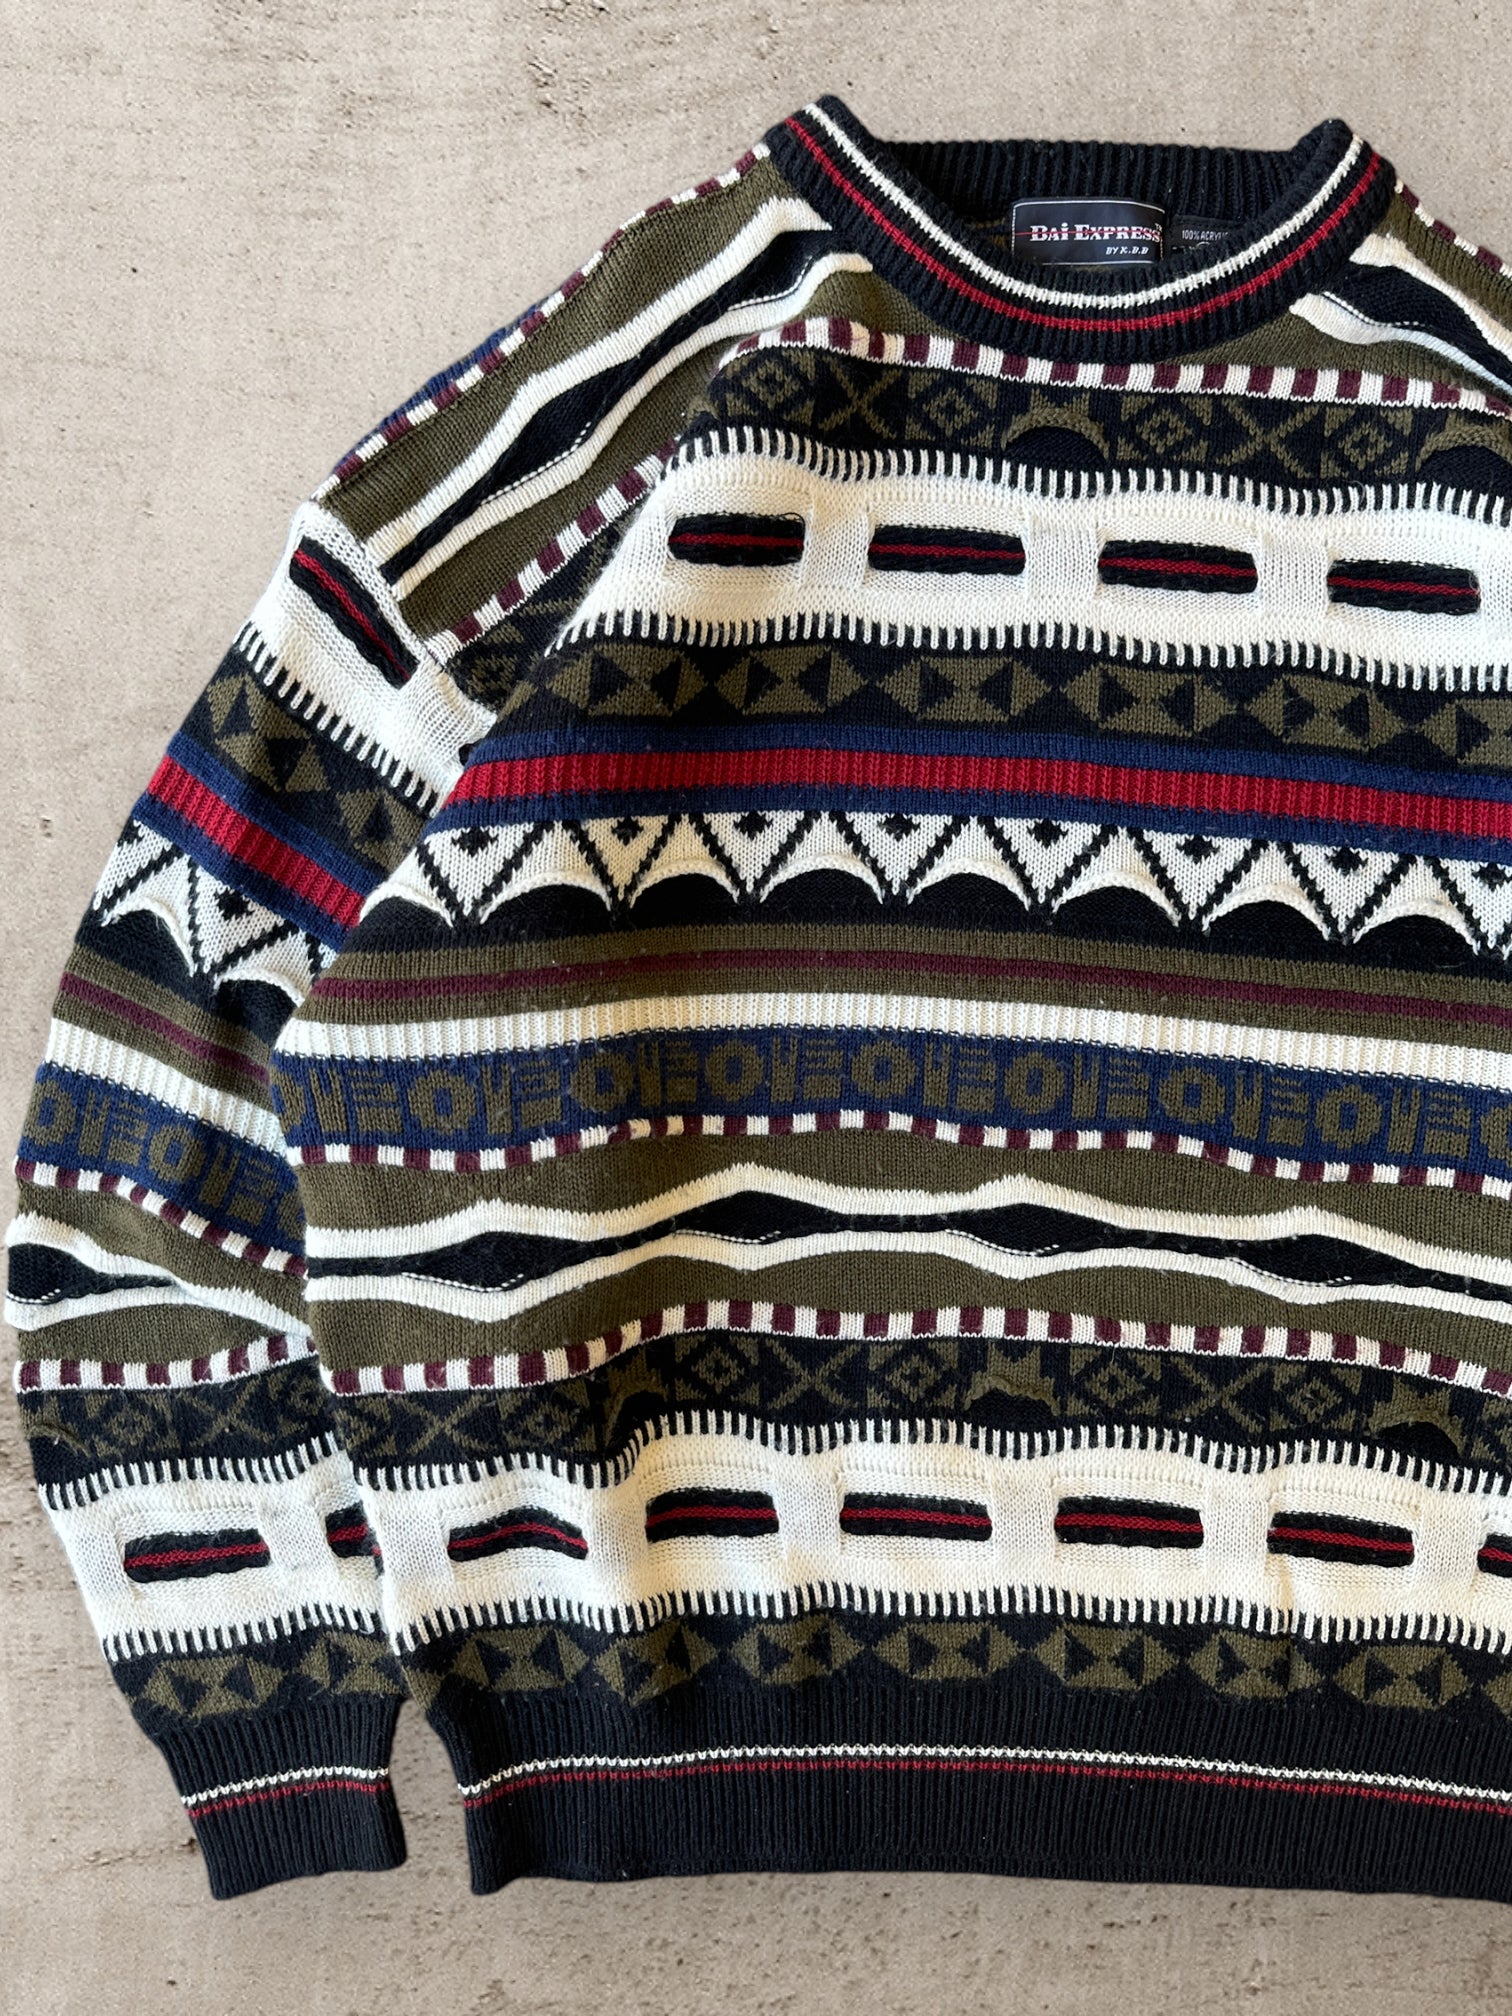 90s Dai Express Multicolor Knit Sweater - XL